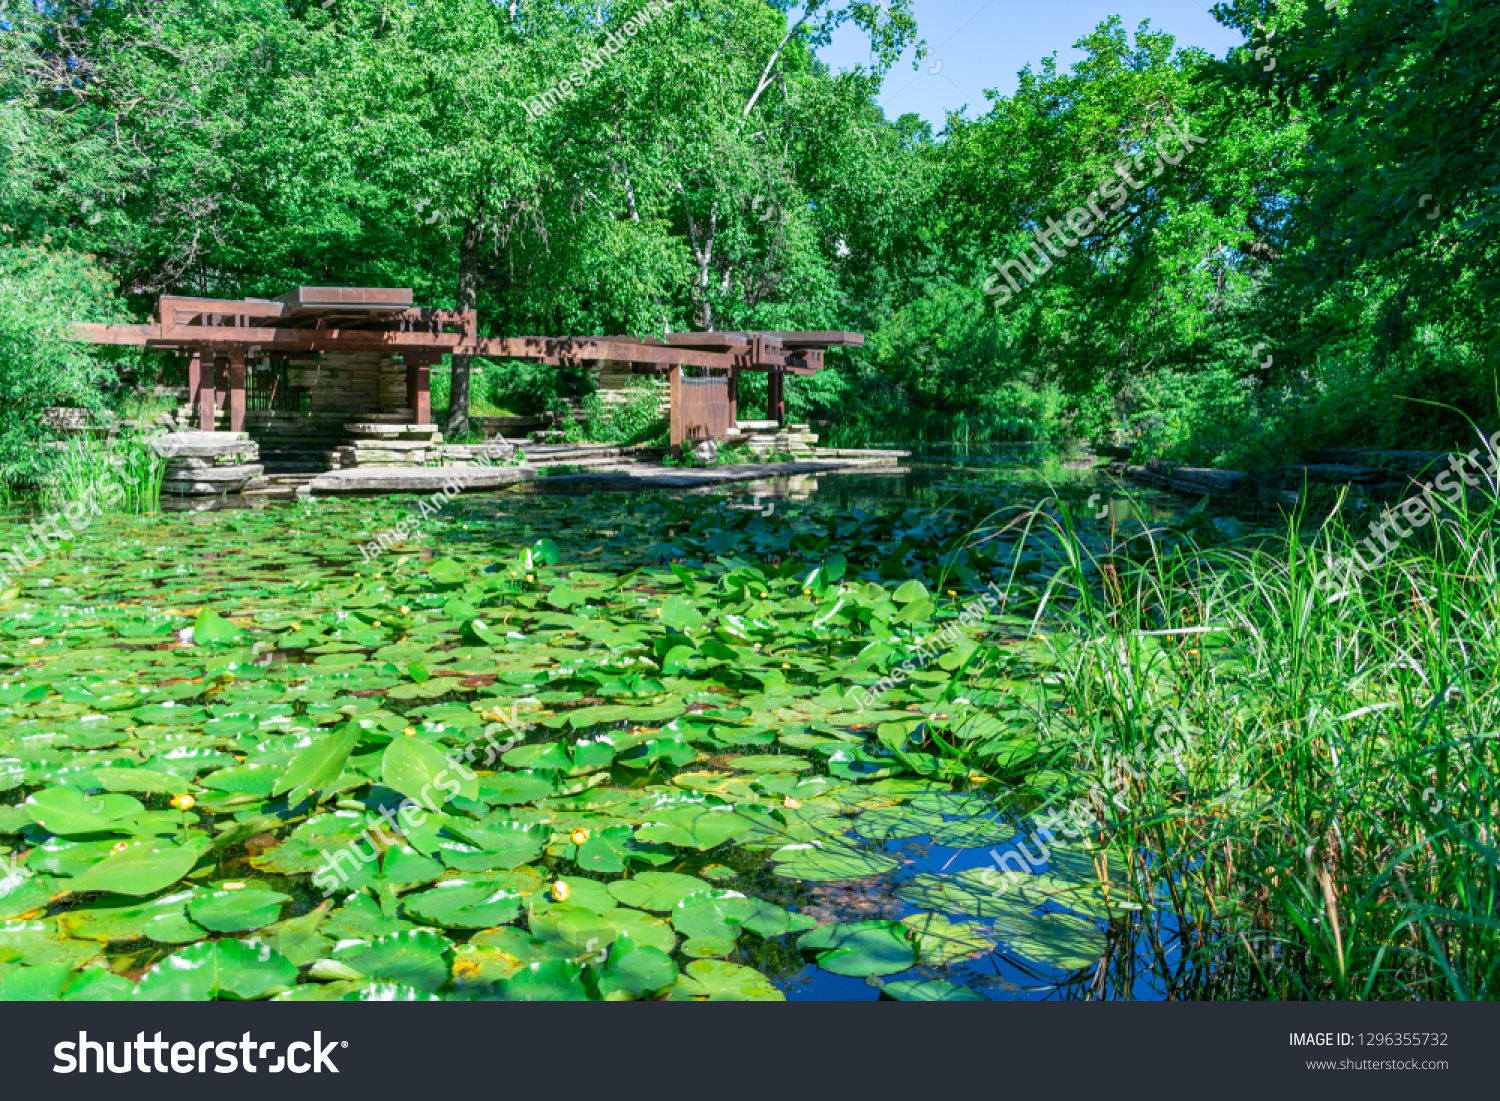 Alfred Caldwell Lily Pool in Lincoln Park Chicago surrounded by Grass and Trees #1296355732